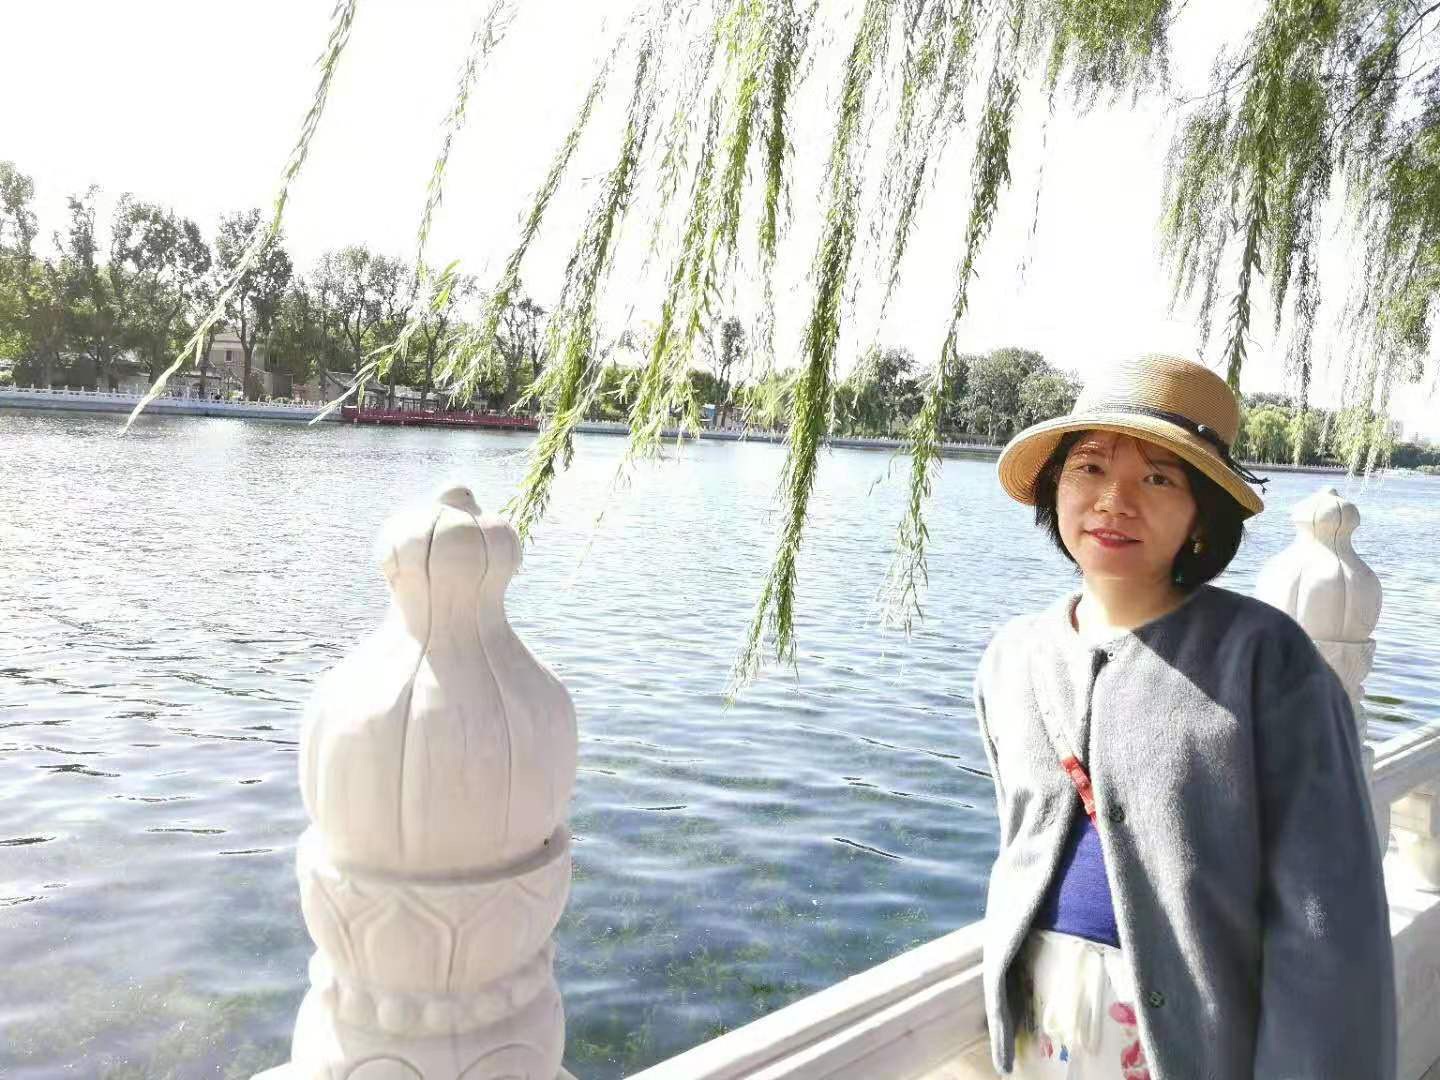 On a sunny day, Jing poses, wearing a white hat, in front of Shicha lake in Beijing.